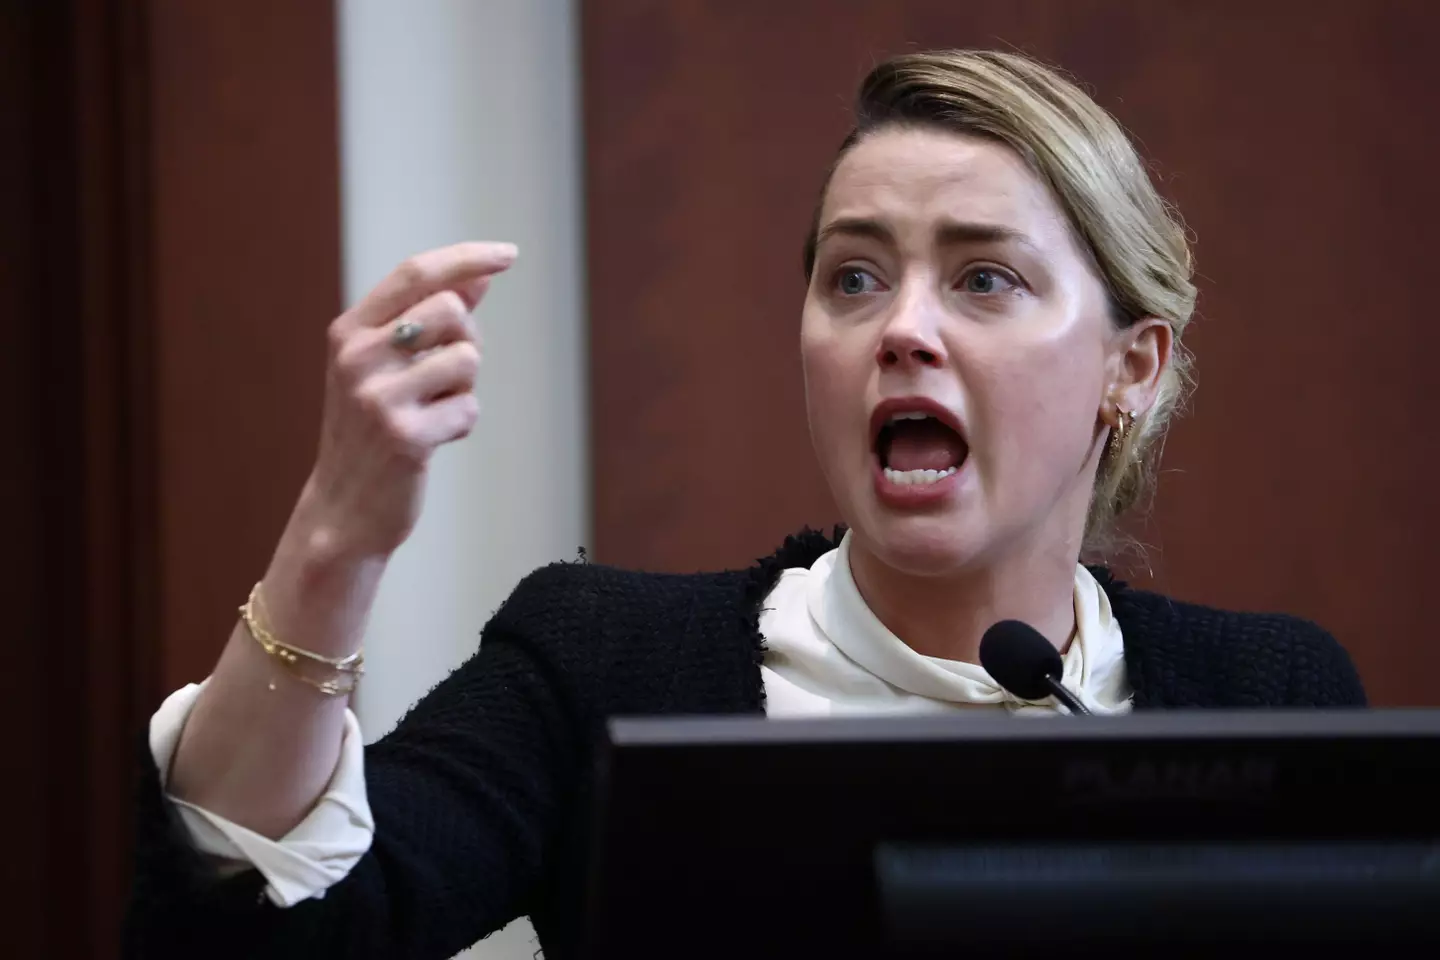 Actor Amber Heard reacts on the stand in the courtroom at Fairfax County Circuit Court during a defamation case against her by ex-husband, actor Johnny Depp,